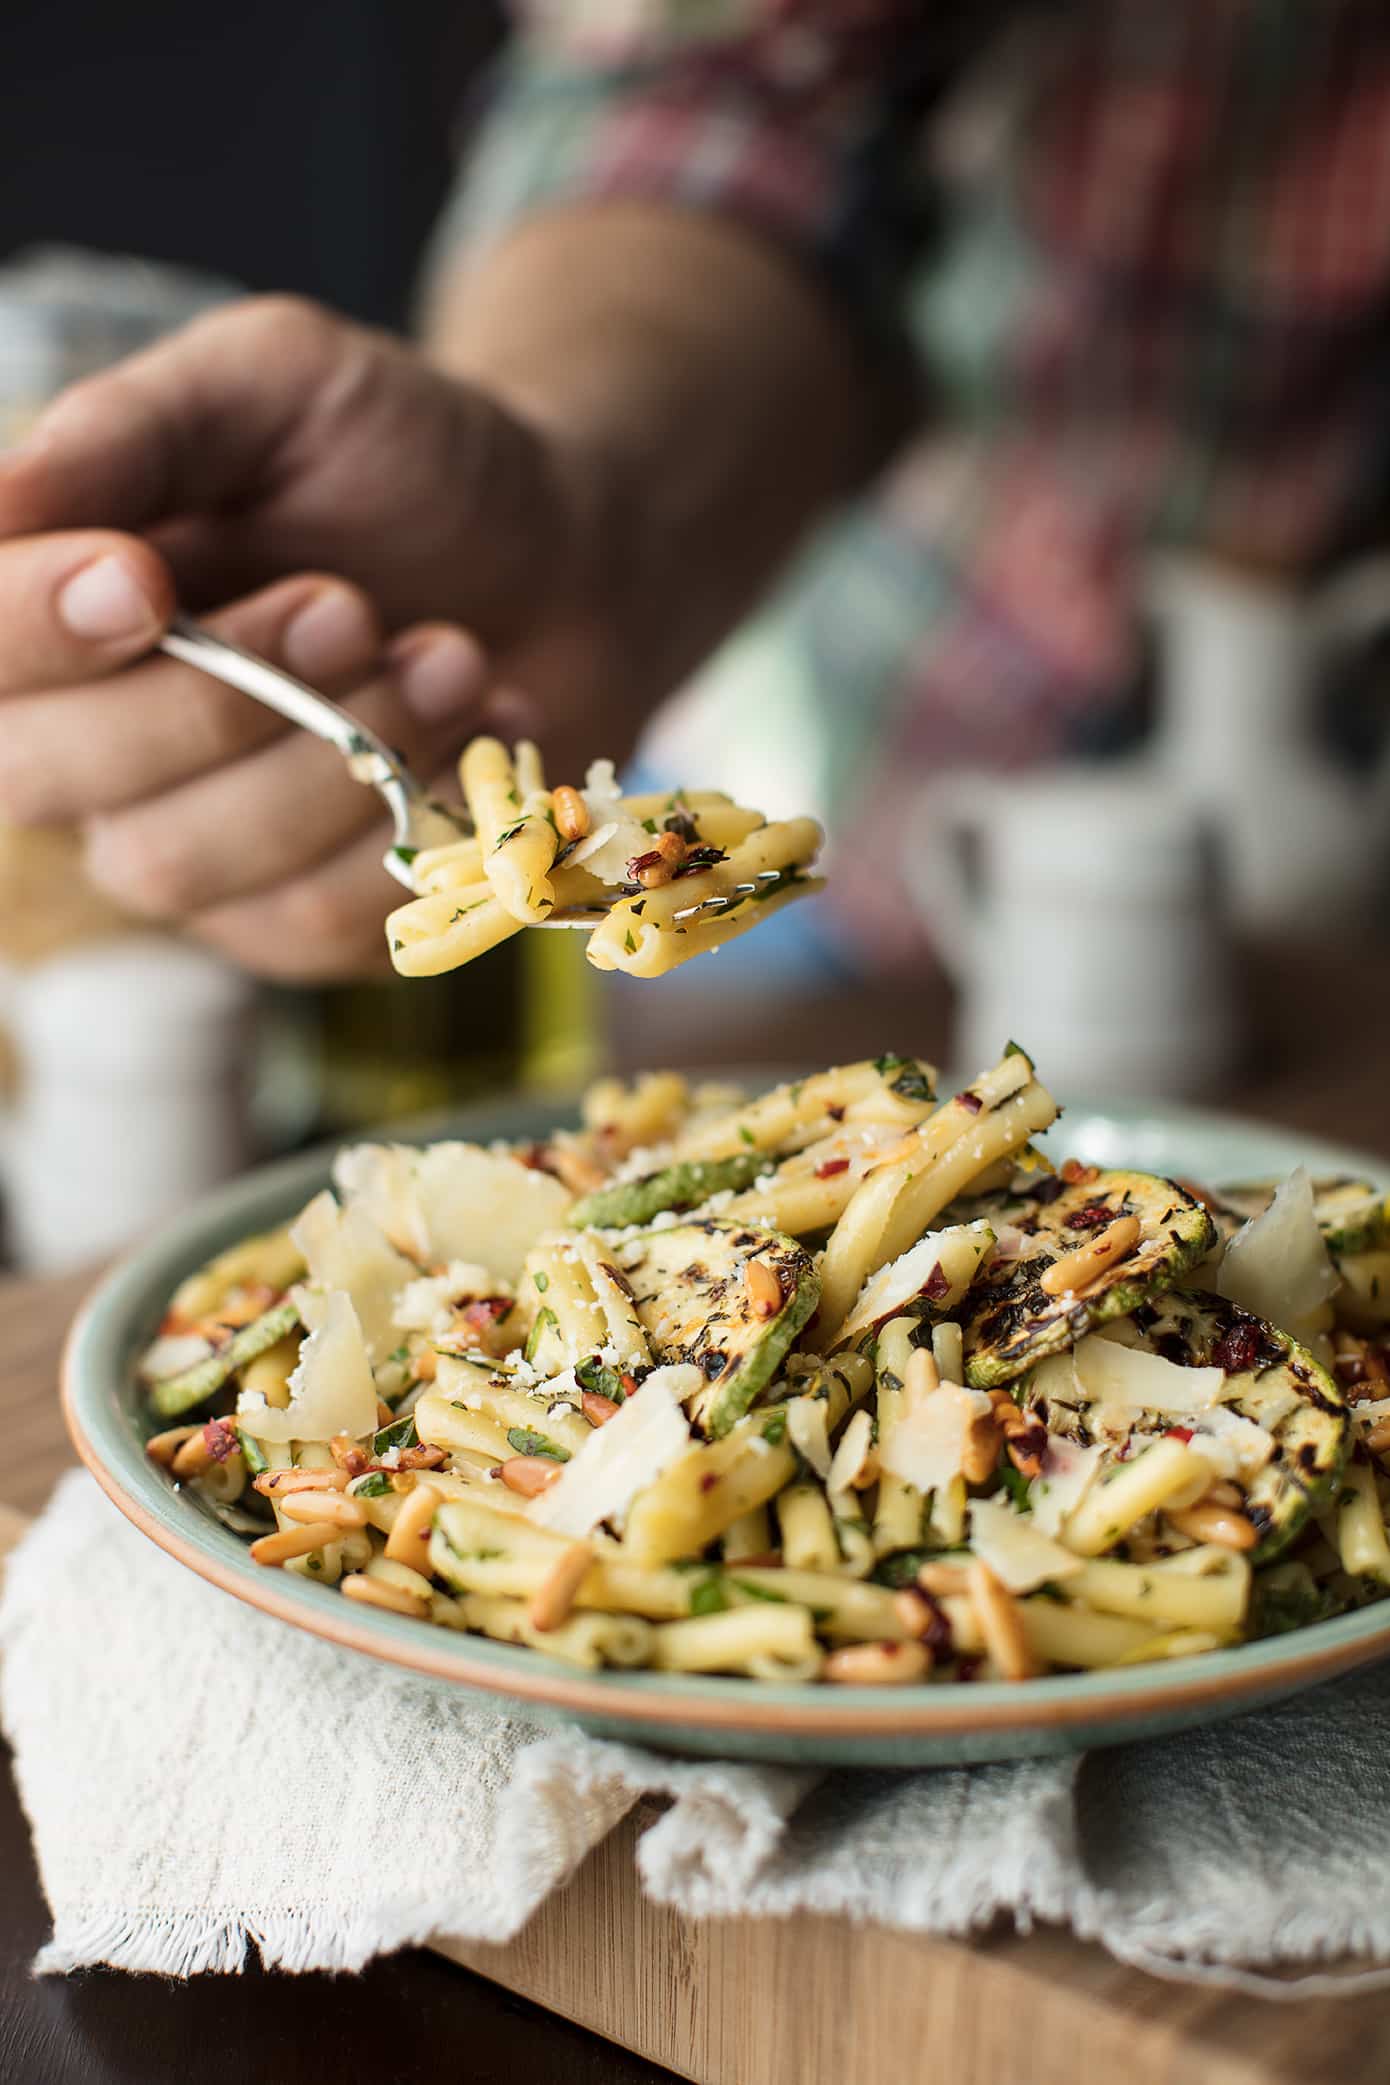 spicy lemon and mint gemelli with creamy ricotta and grilled zucchini - We Eat Together.com